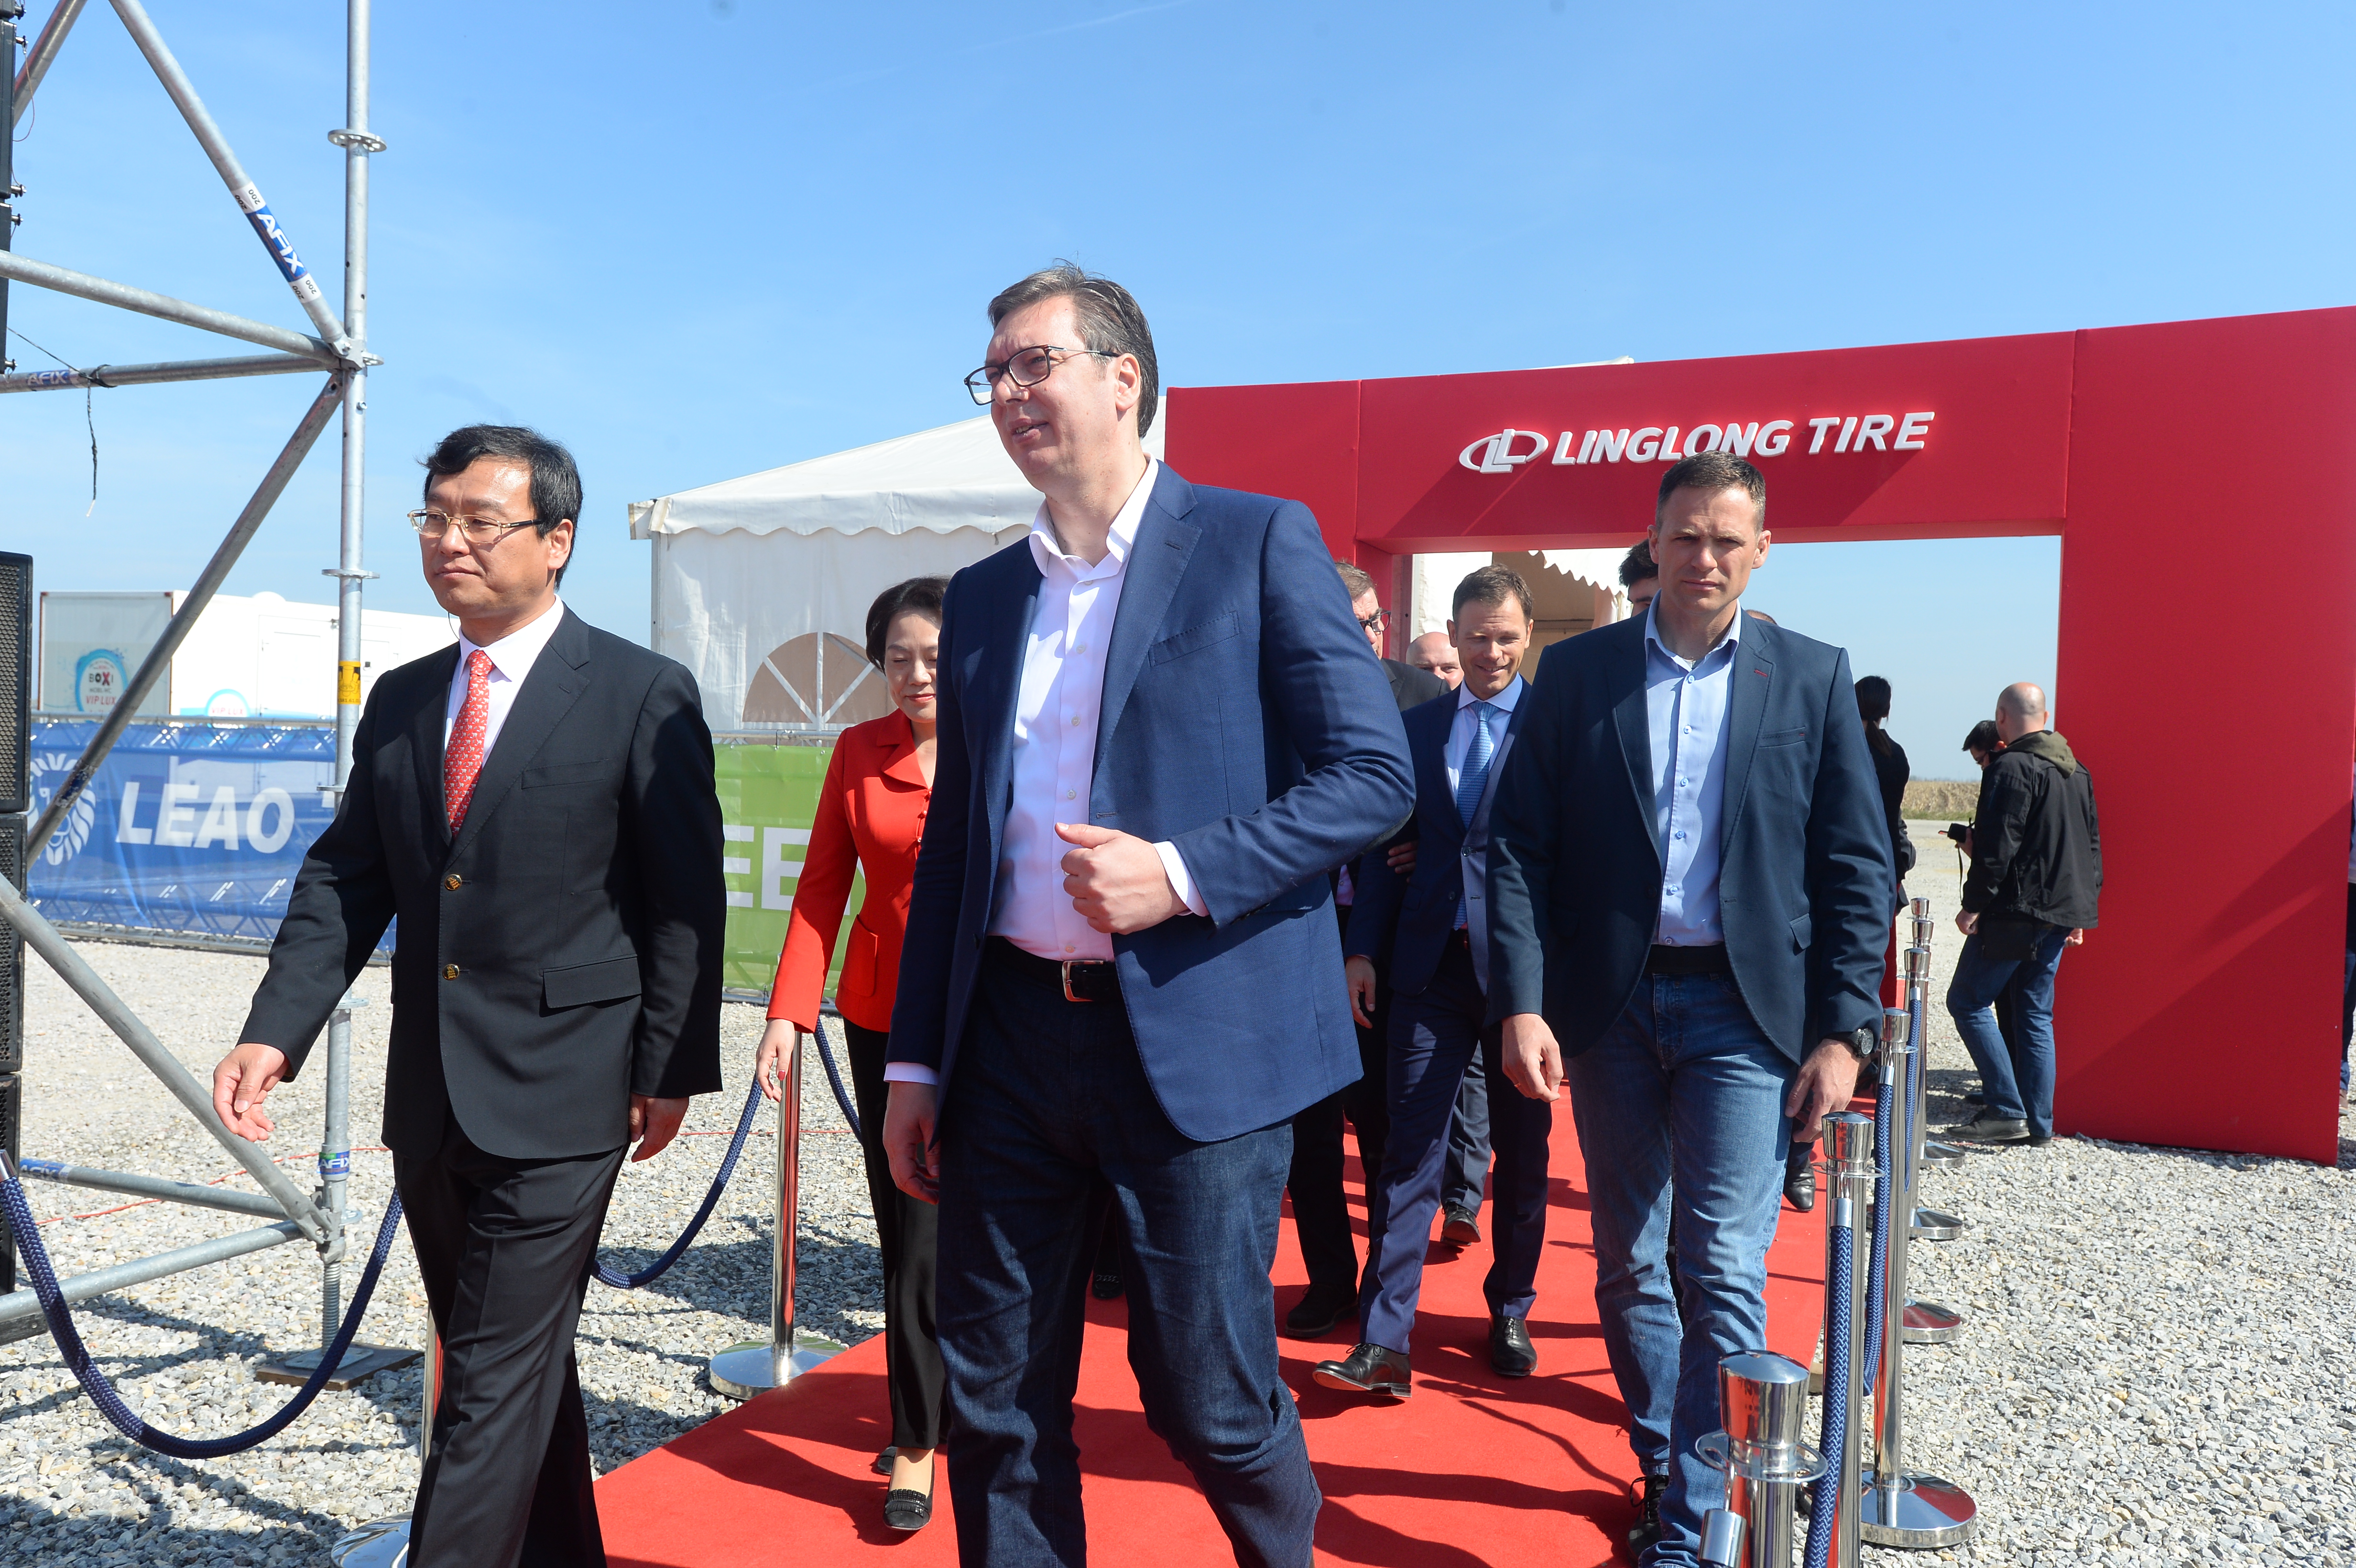 “Shandong Linglong" started to build tyre factory in Zrenjanin